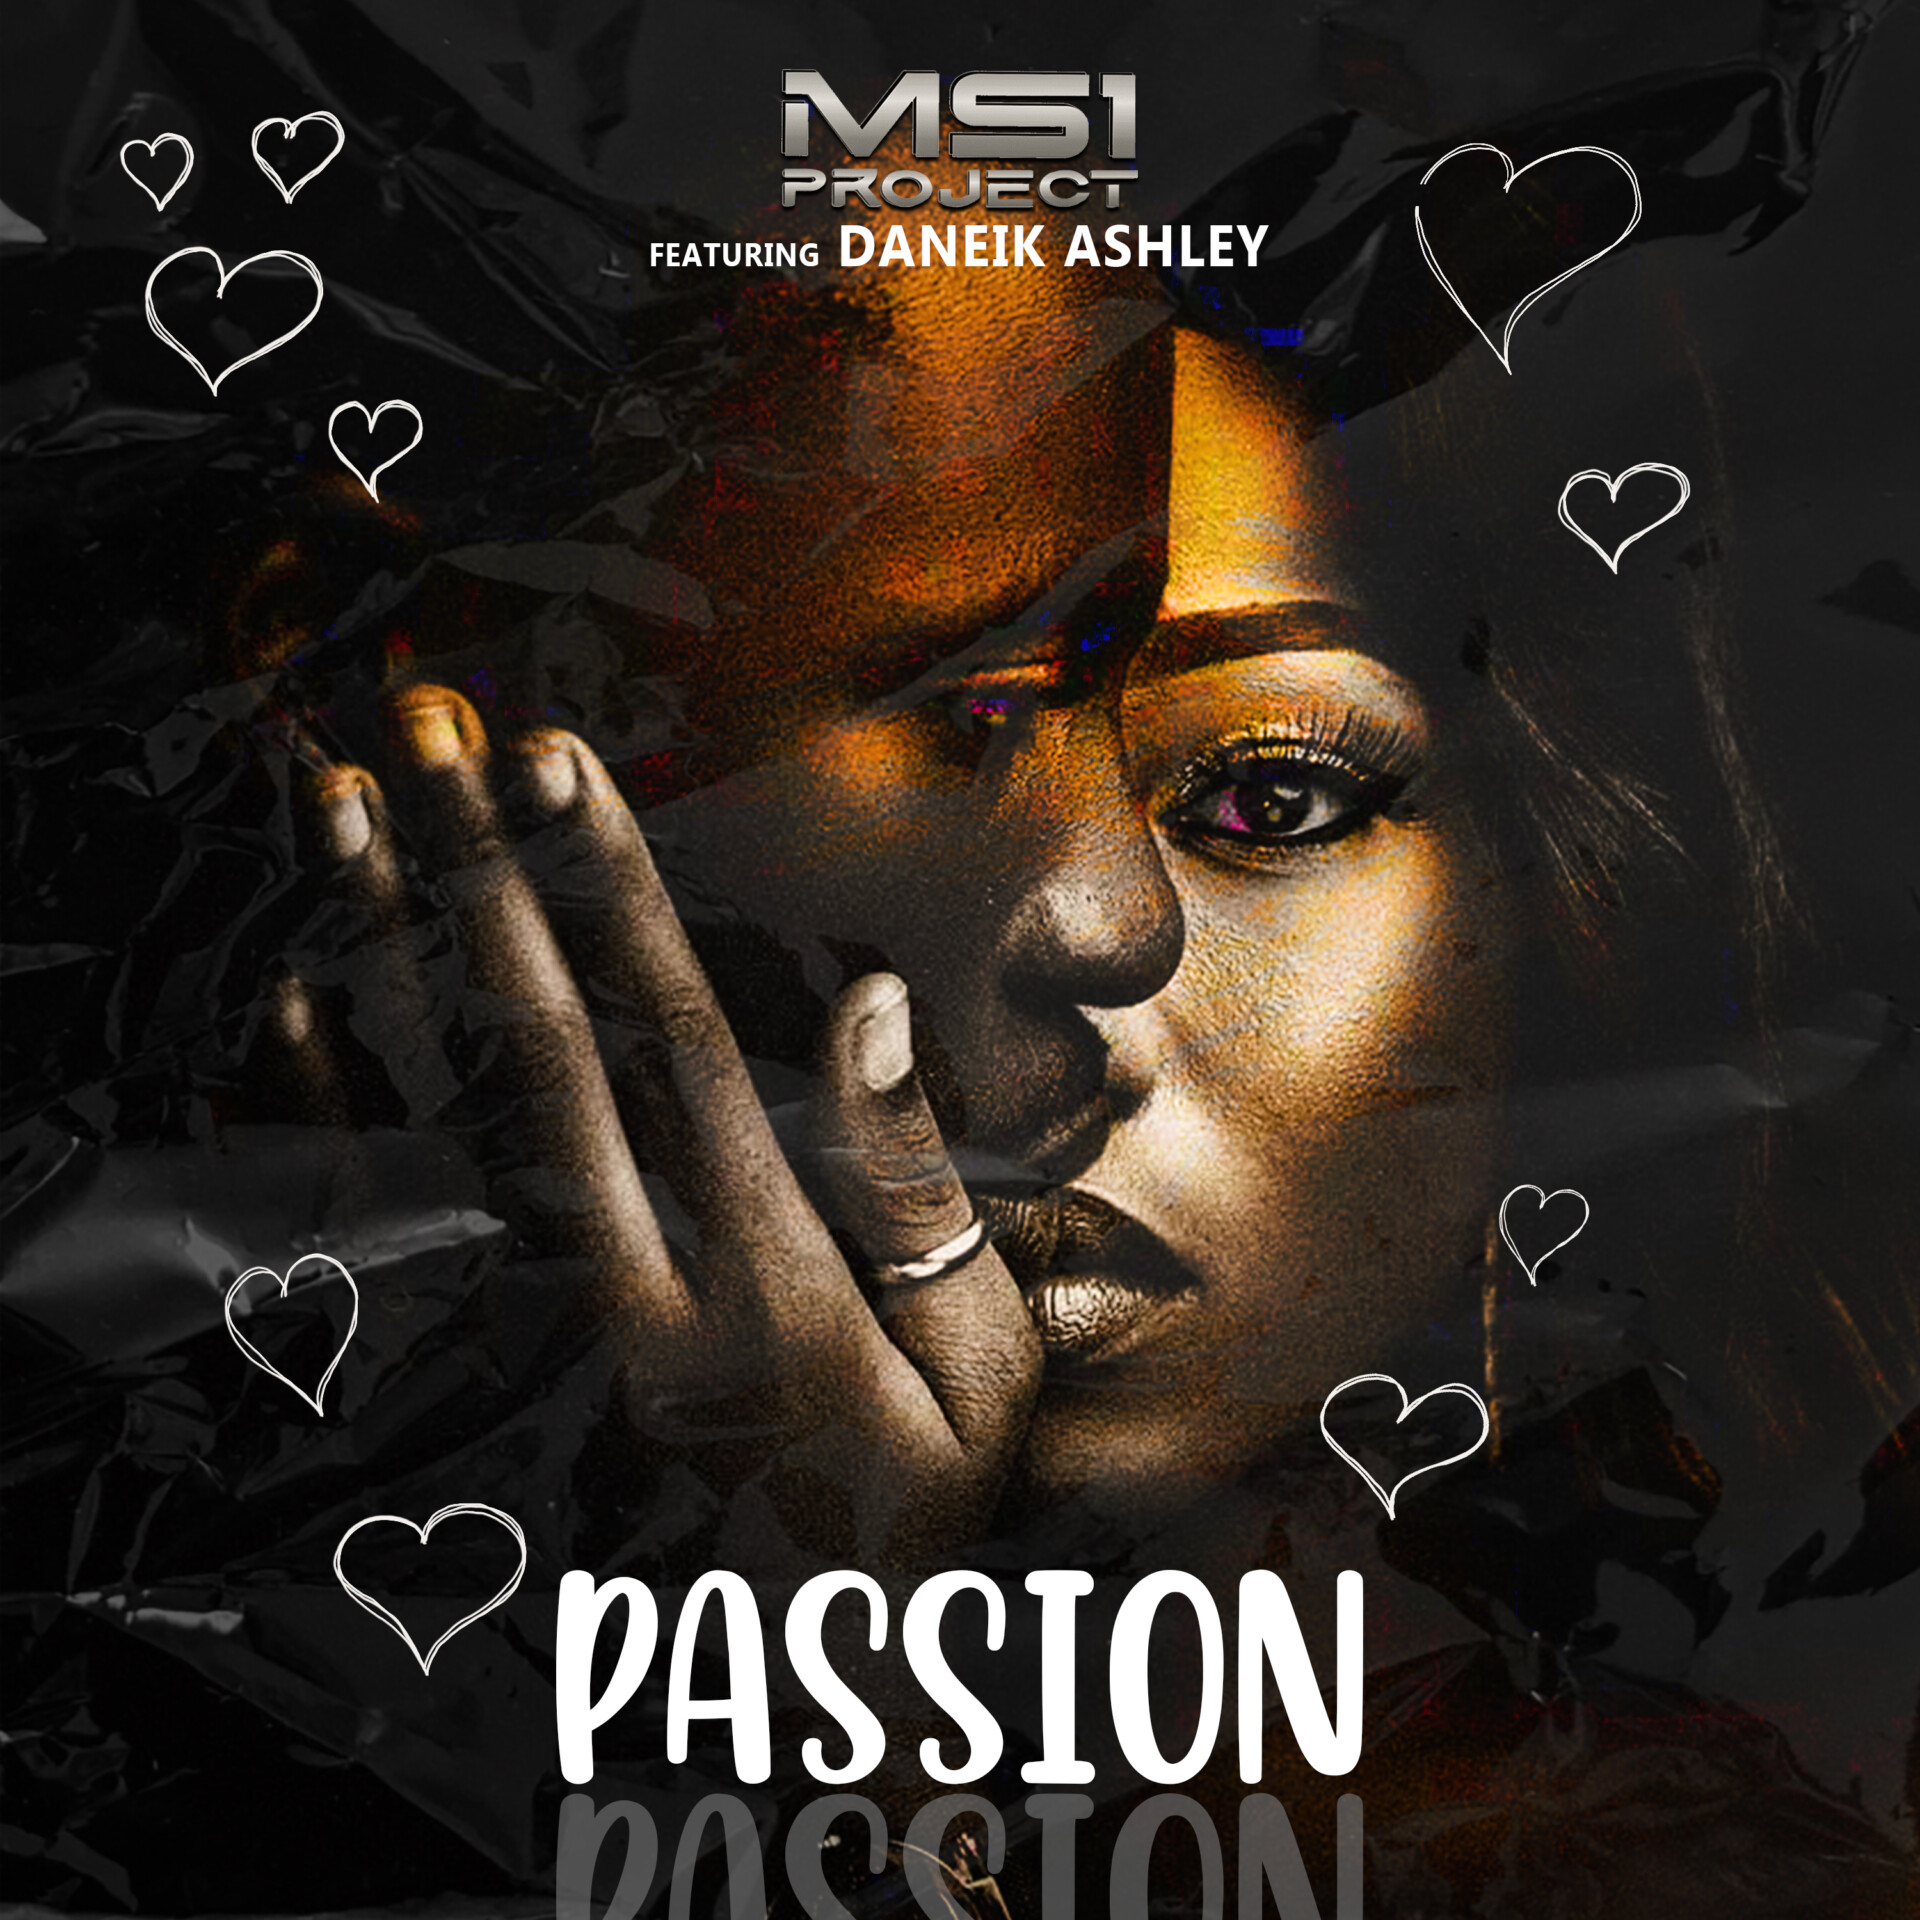 MS1 -Passion cover